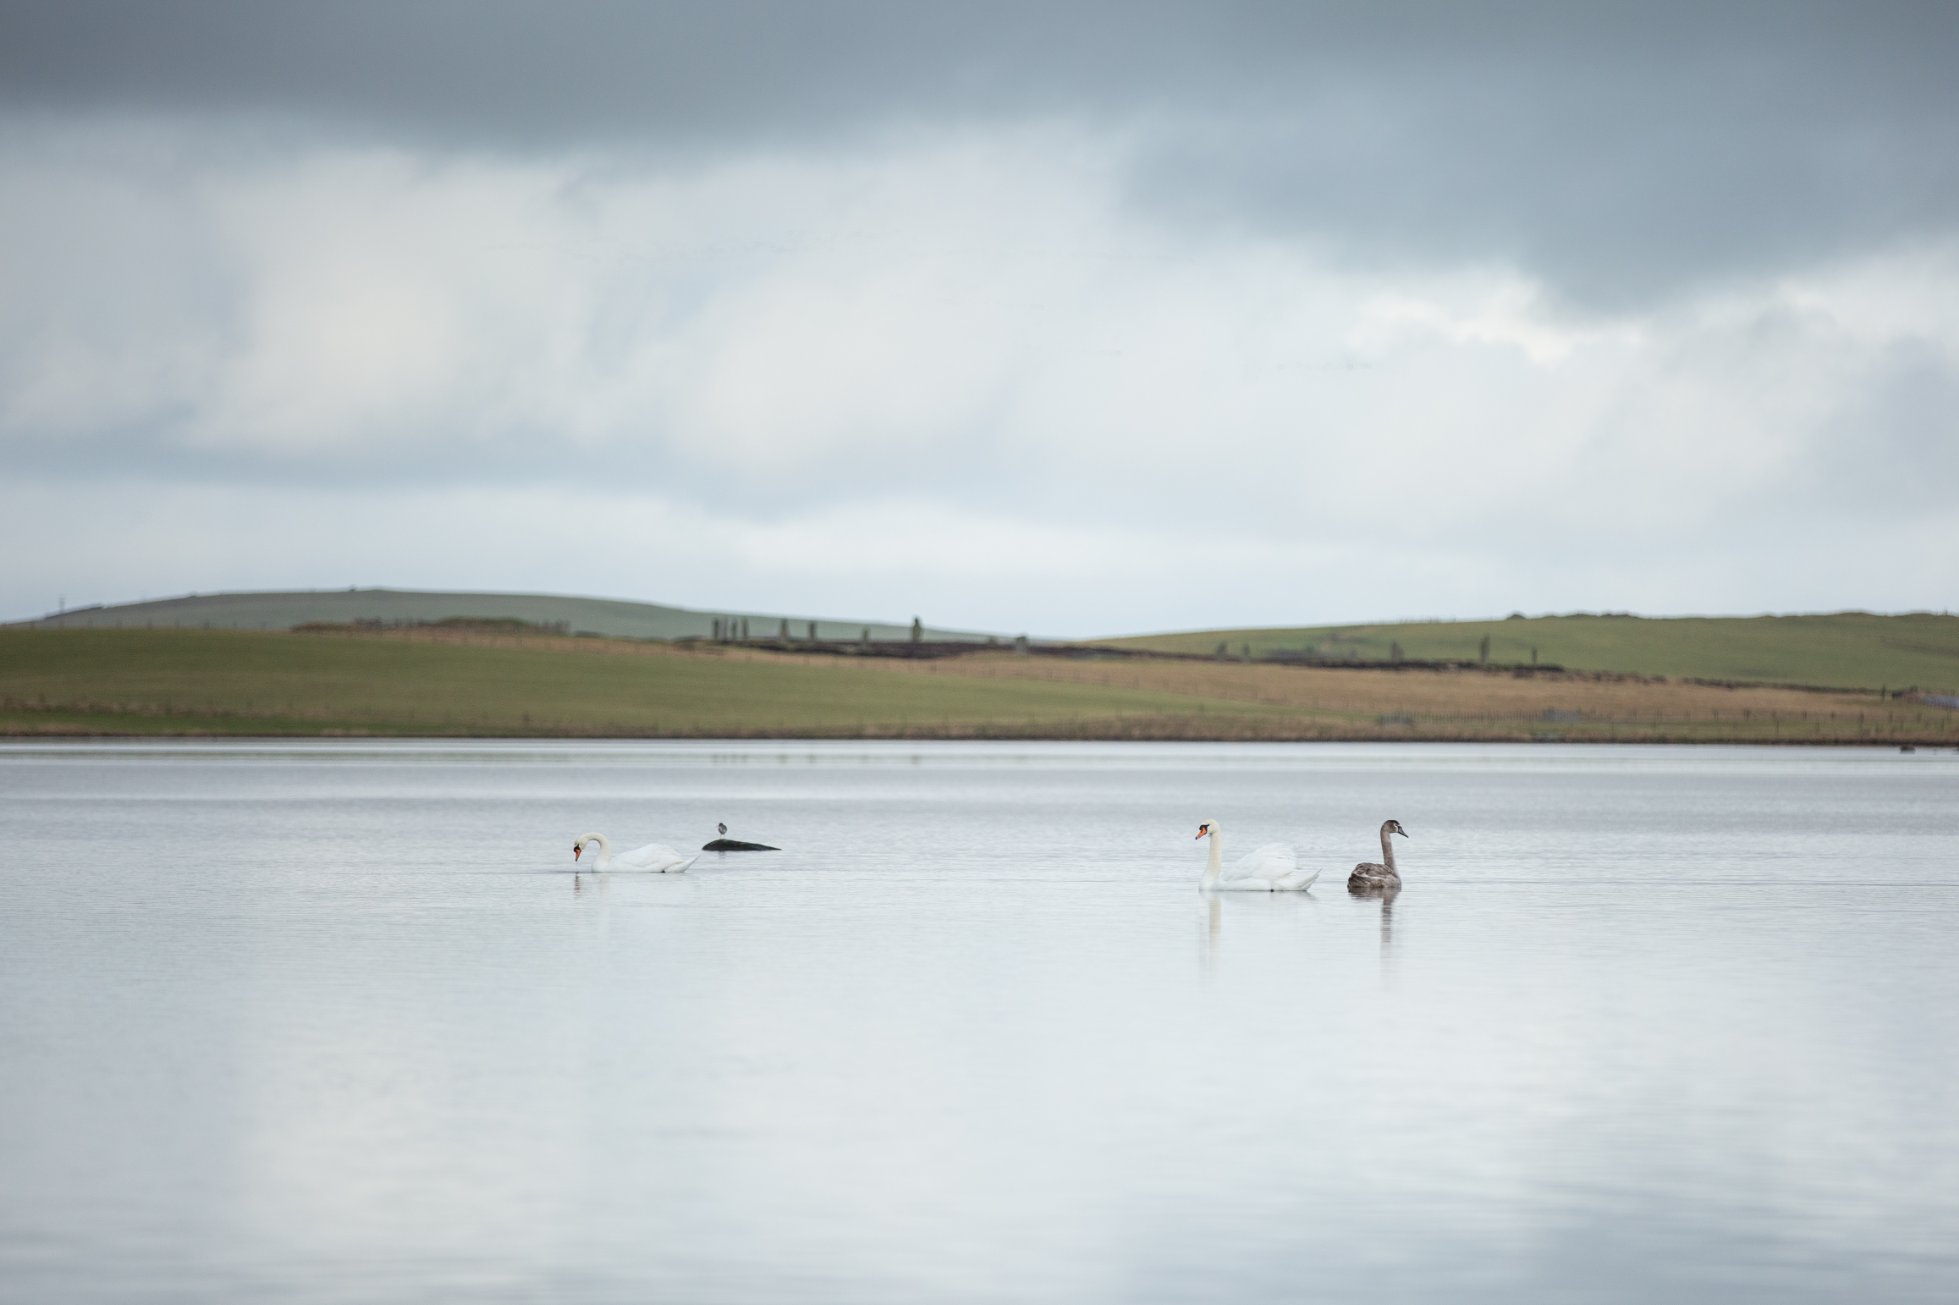 Swans in the Stenness Loch, with the Ring of Brodgar in the distance